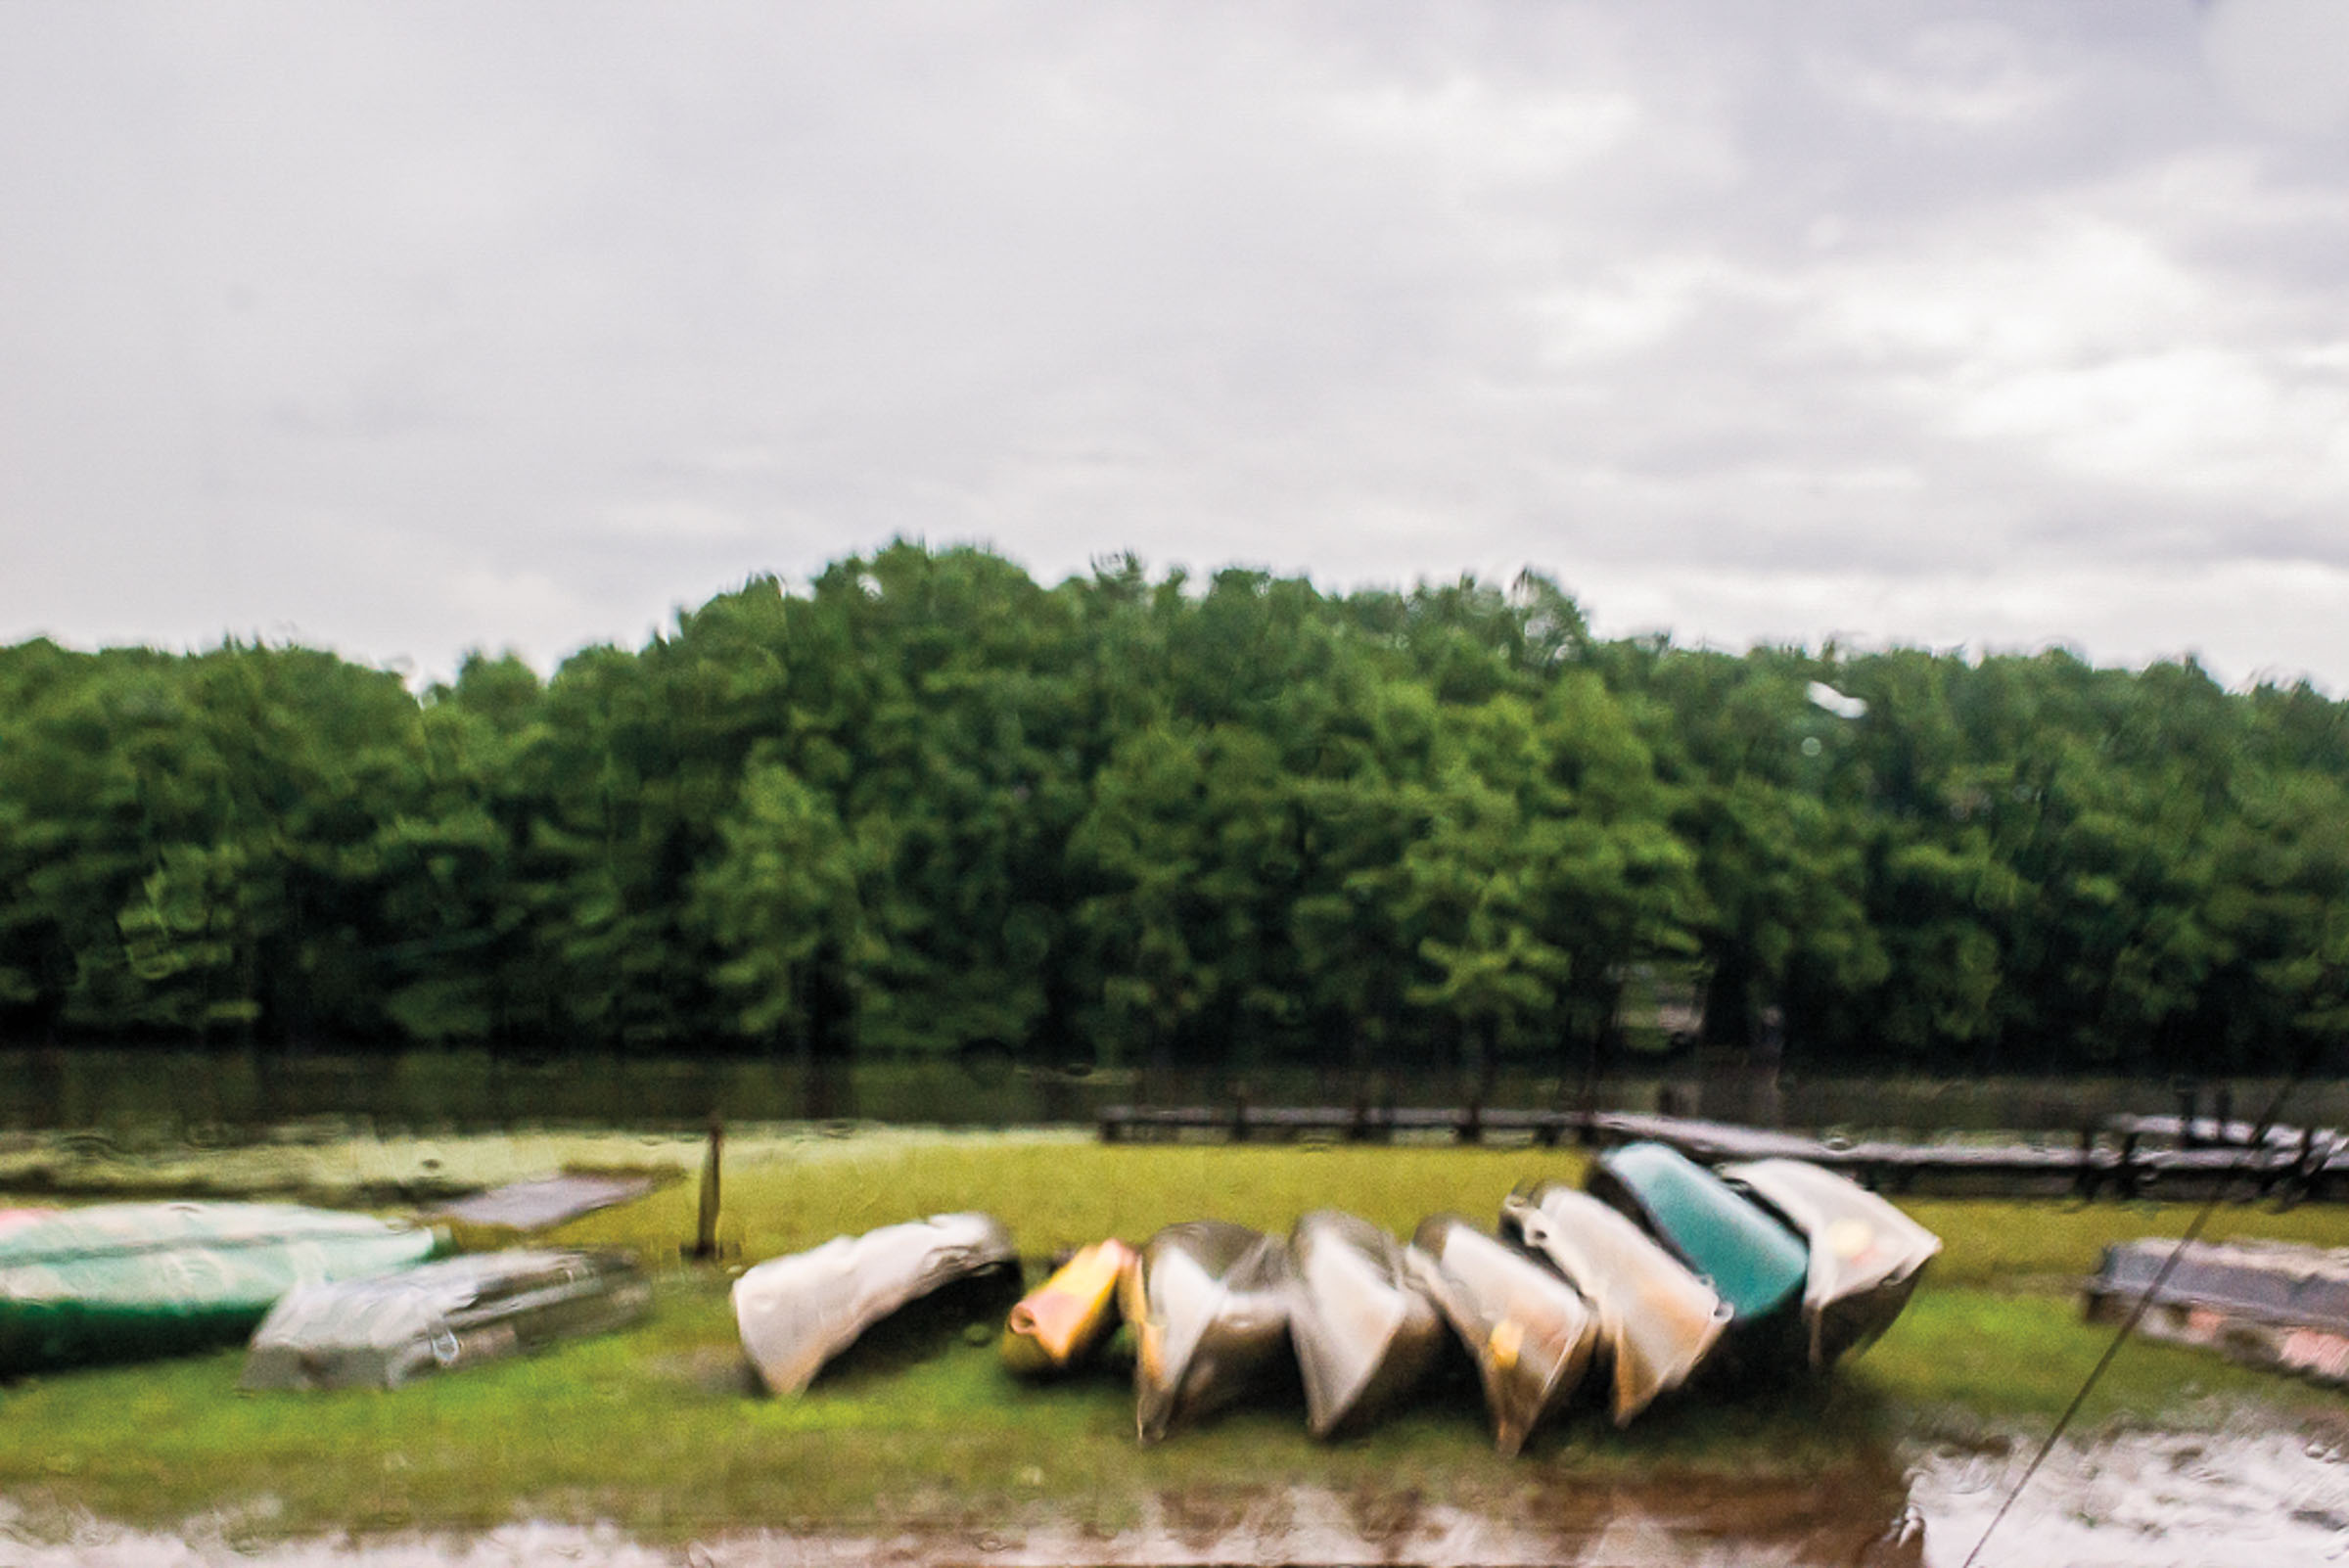 On a rainy day, canoes are lined up waiting for someone to use them near Caddo Lake and Uncertain, Texas